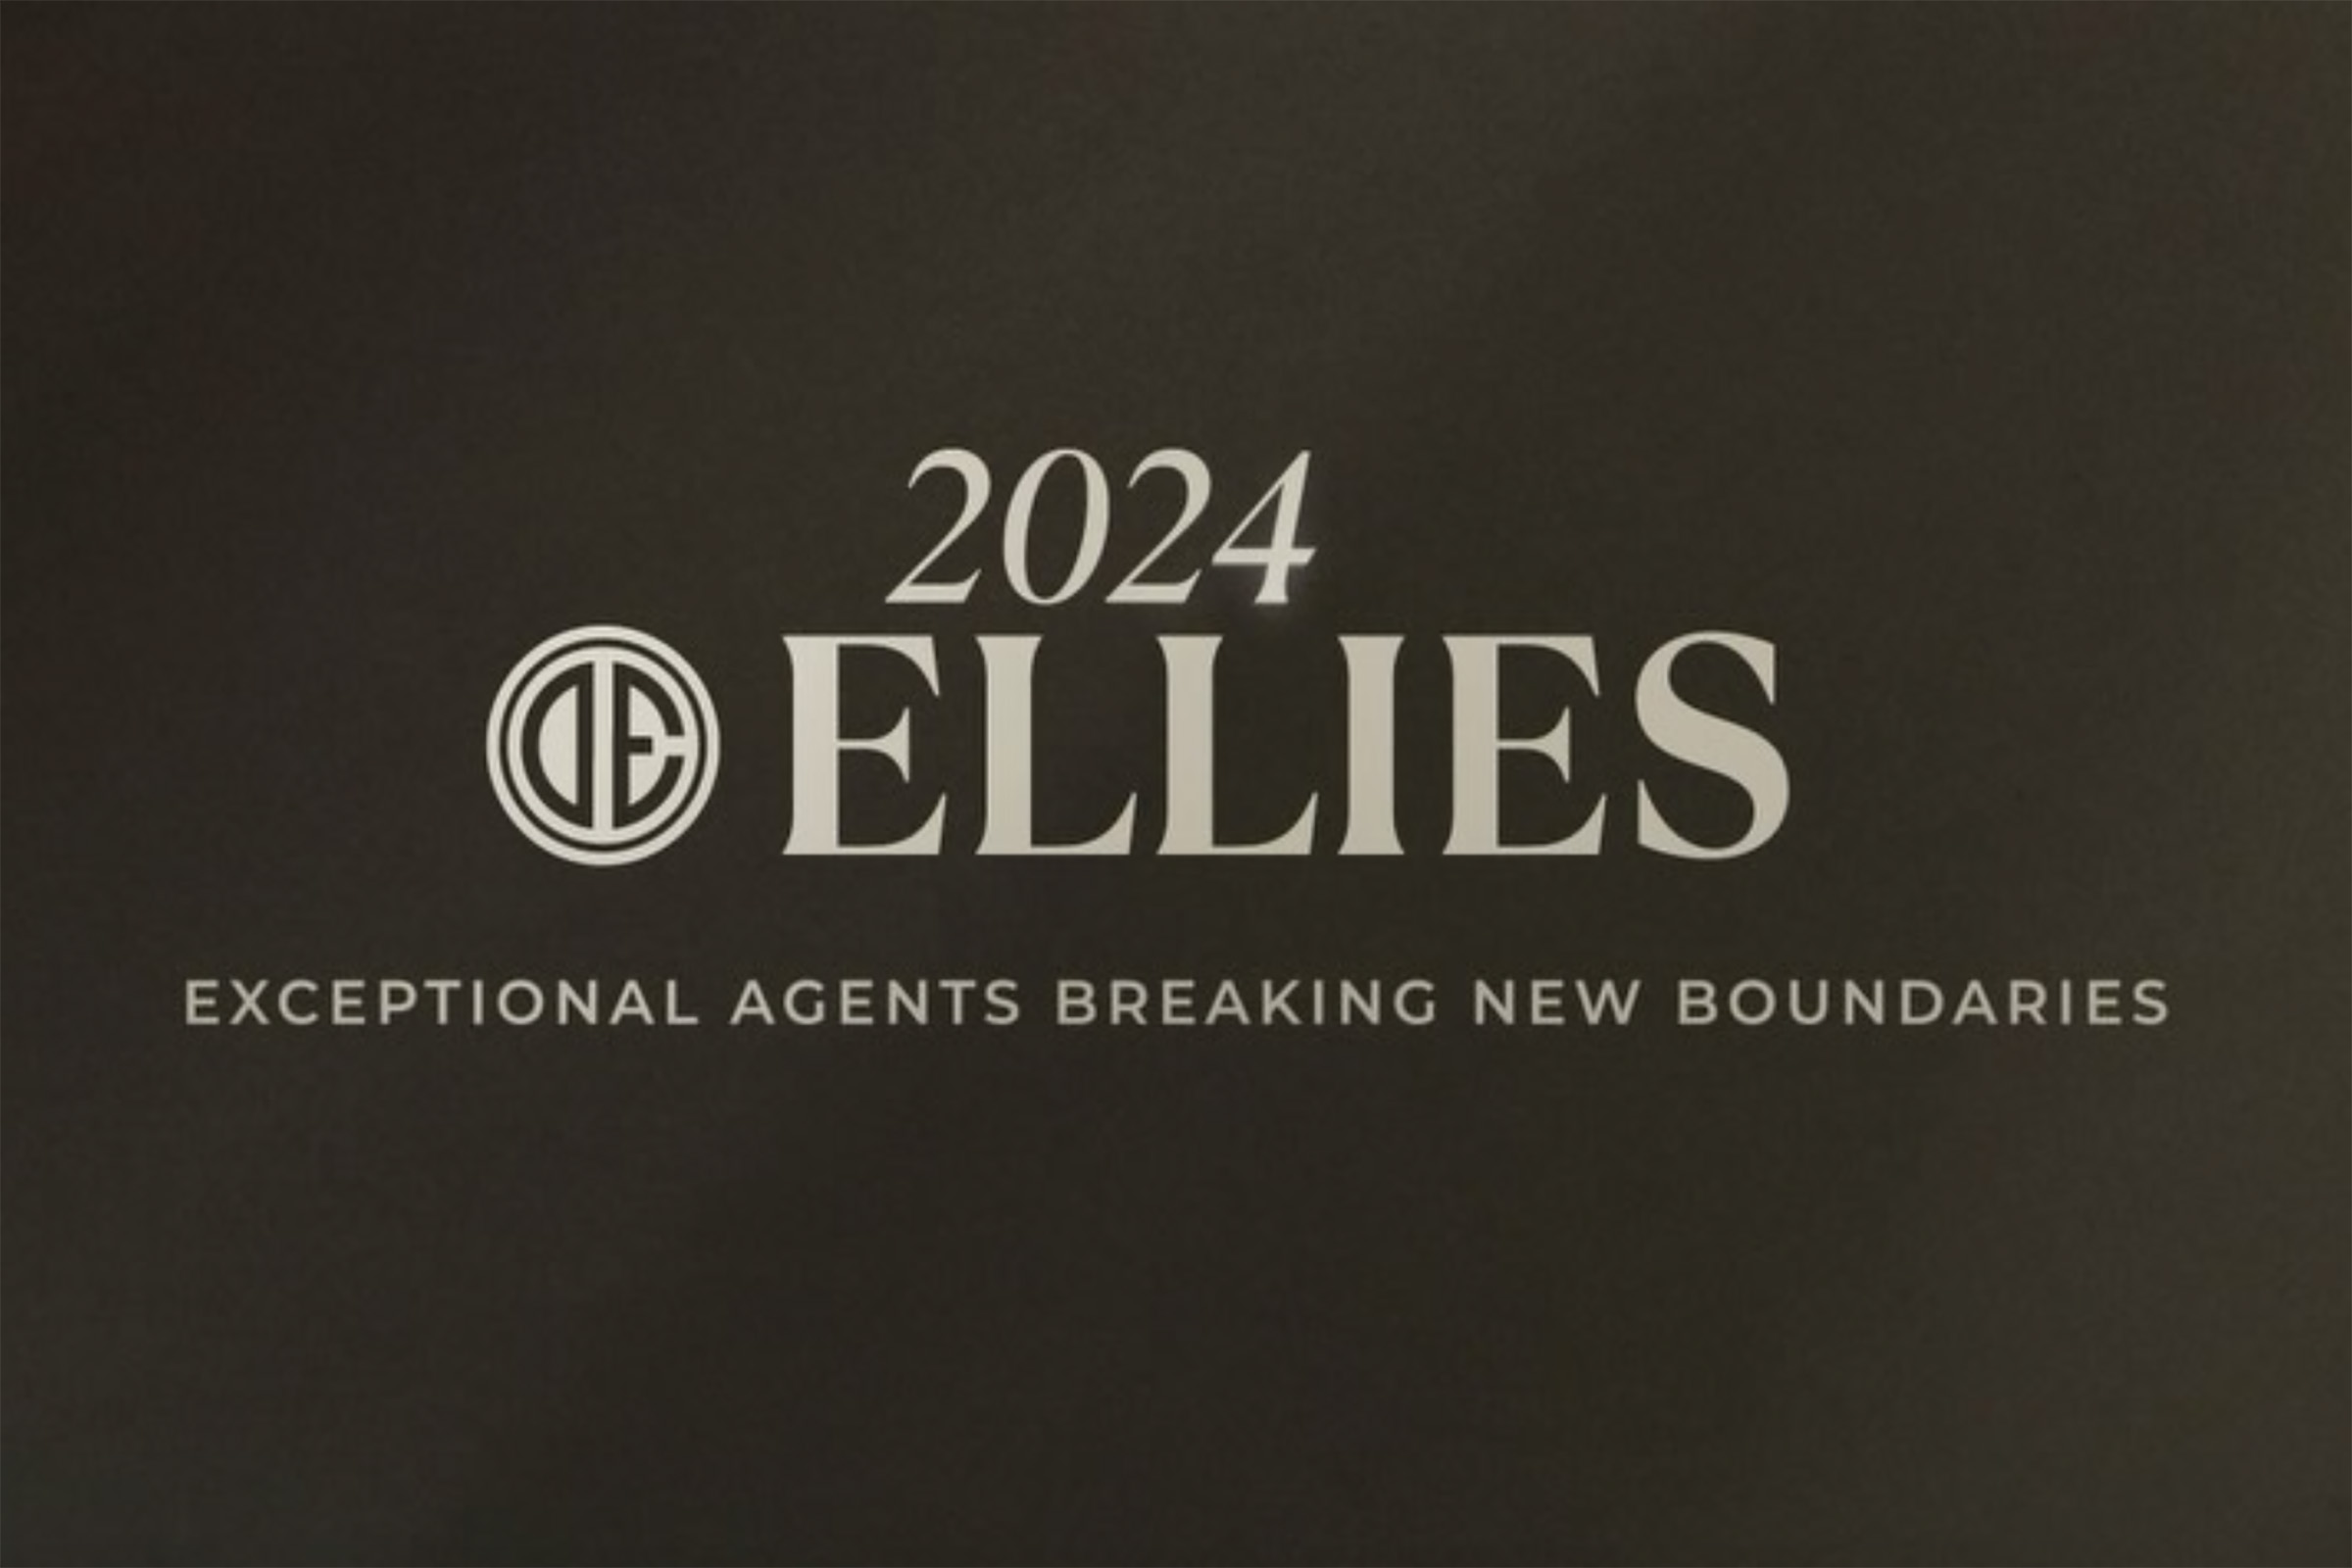 The Light Group Is Once Again Honored With Douglas Elliman’s Pinnacle Award At The 2024 Ellie’s